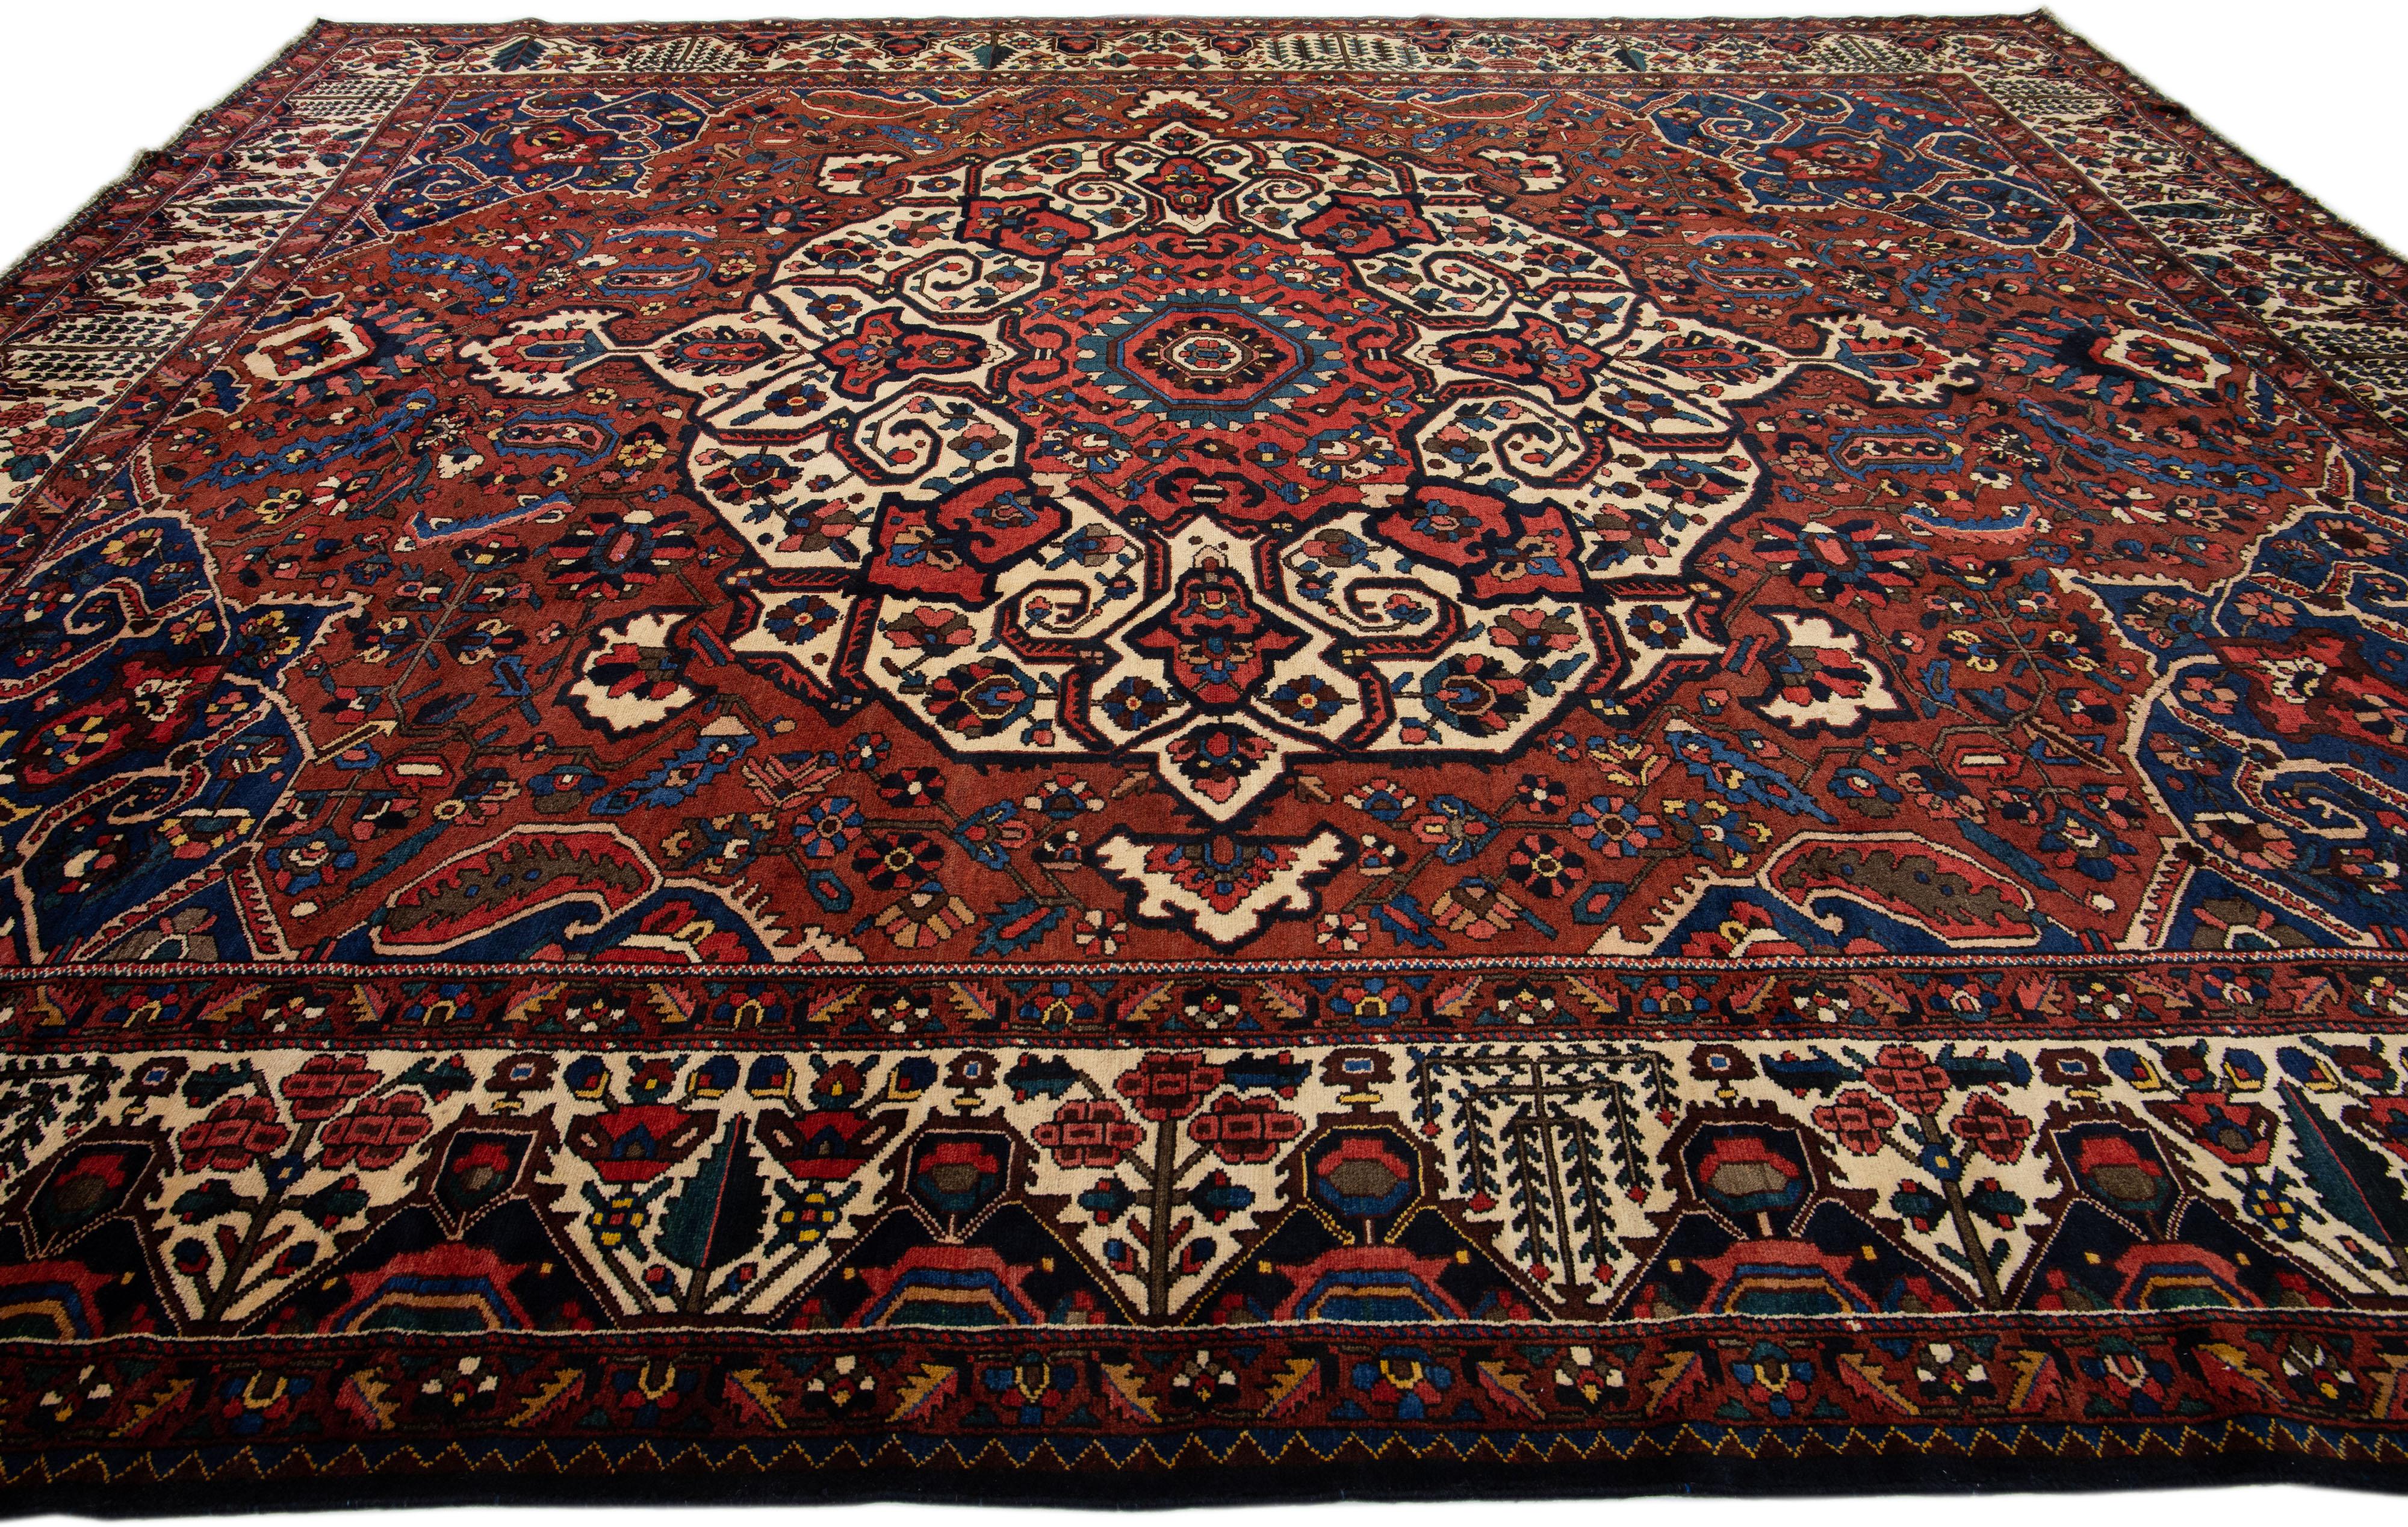 Handmade Rosette Antique Persian Bakhtiari Wool Rug With Red Color Field In Good Condition For Sale In Norwalk, CT